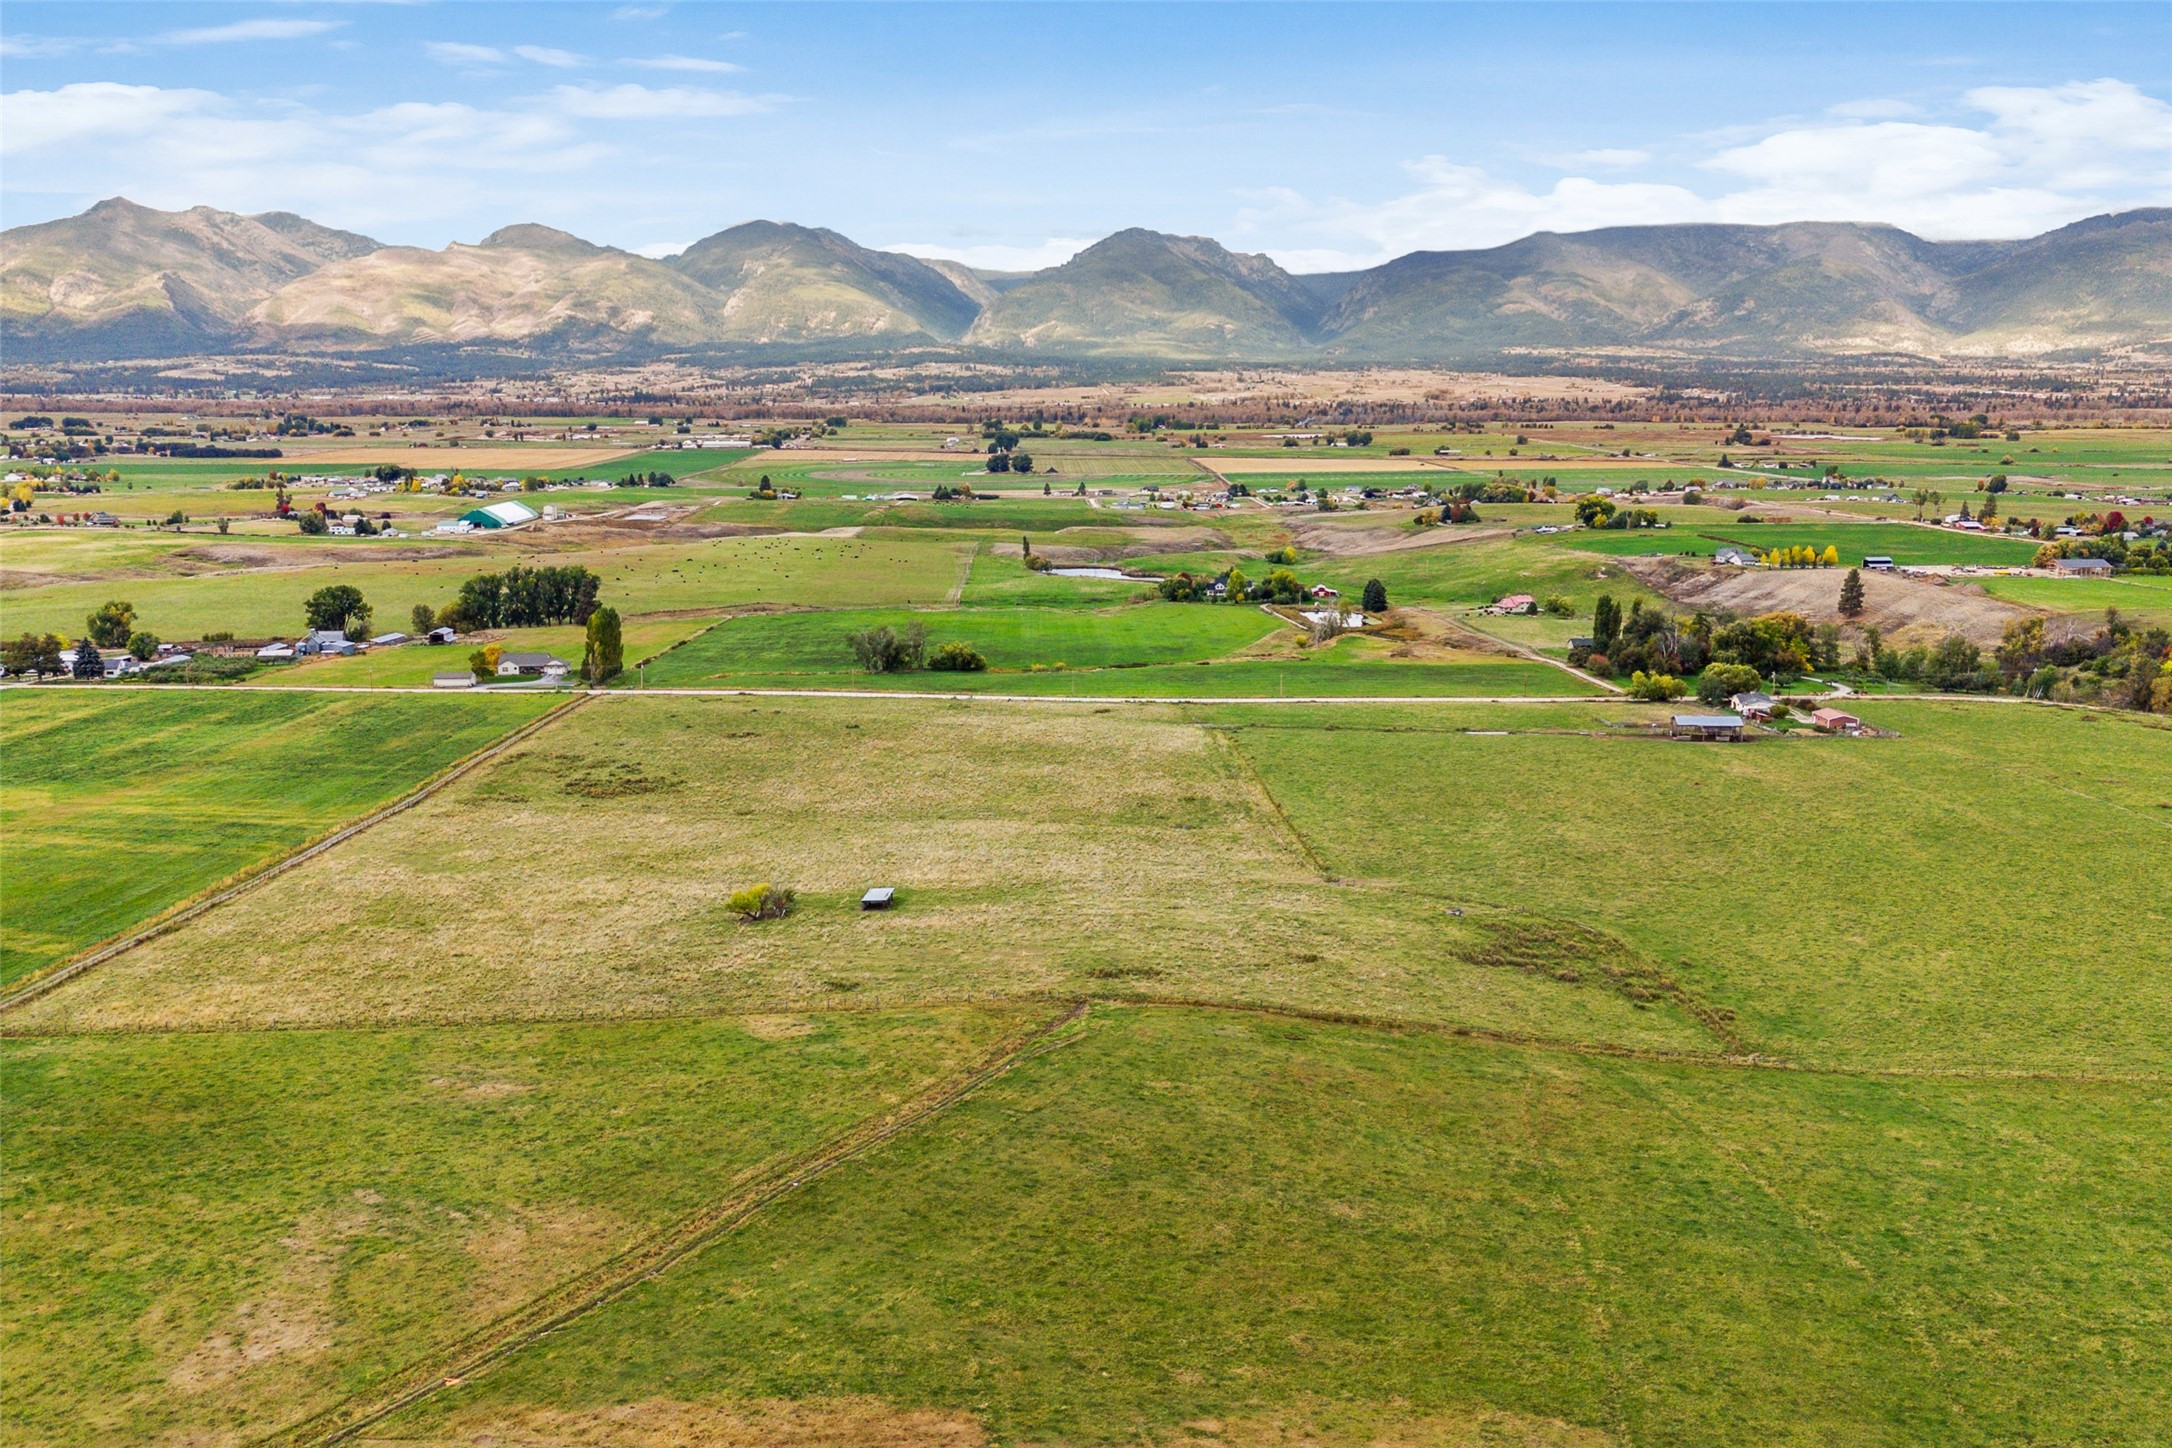 Lot 18 Mountain View Orchard Road, Corvallis, MT 59828